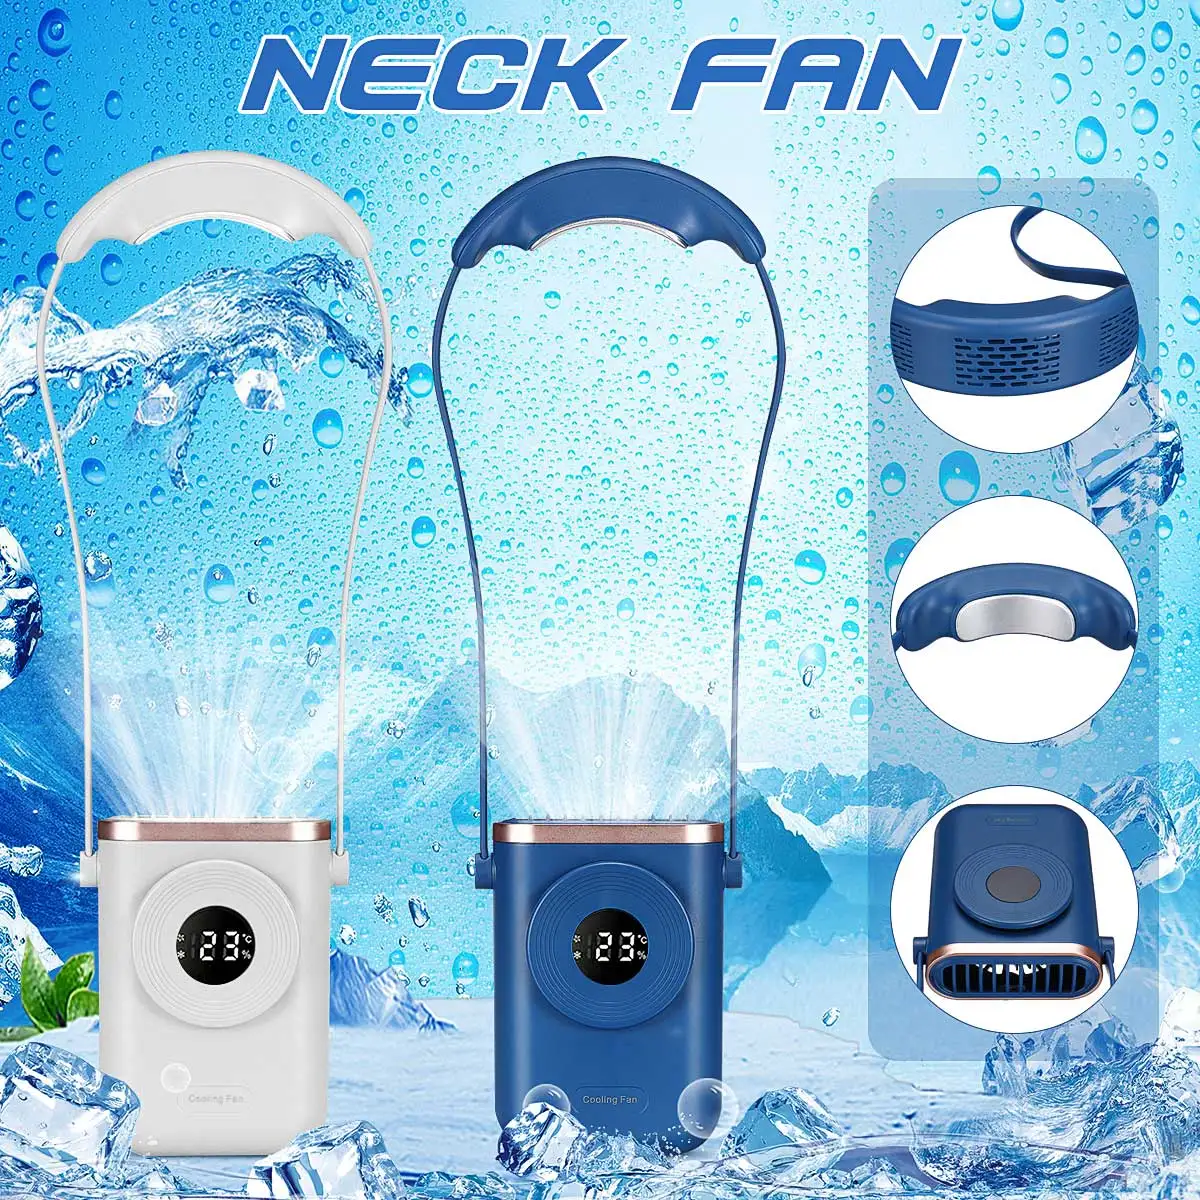 

Mini Protable Neck Fan With Refrigeration Electric Wireless Fan Bladeless Rechargeable USB Fan Air Conditioning For Outdoor